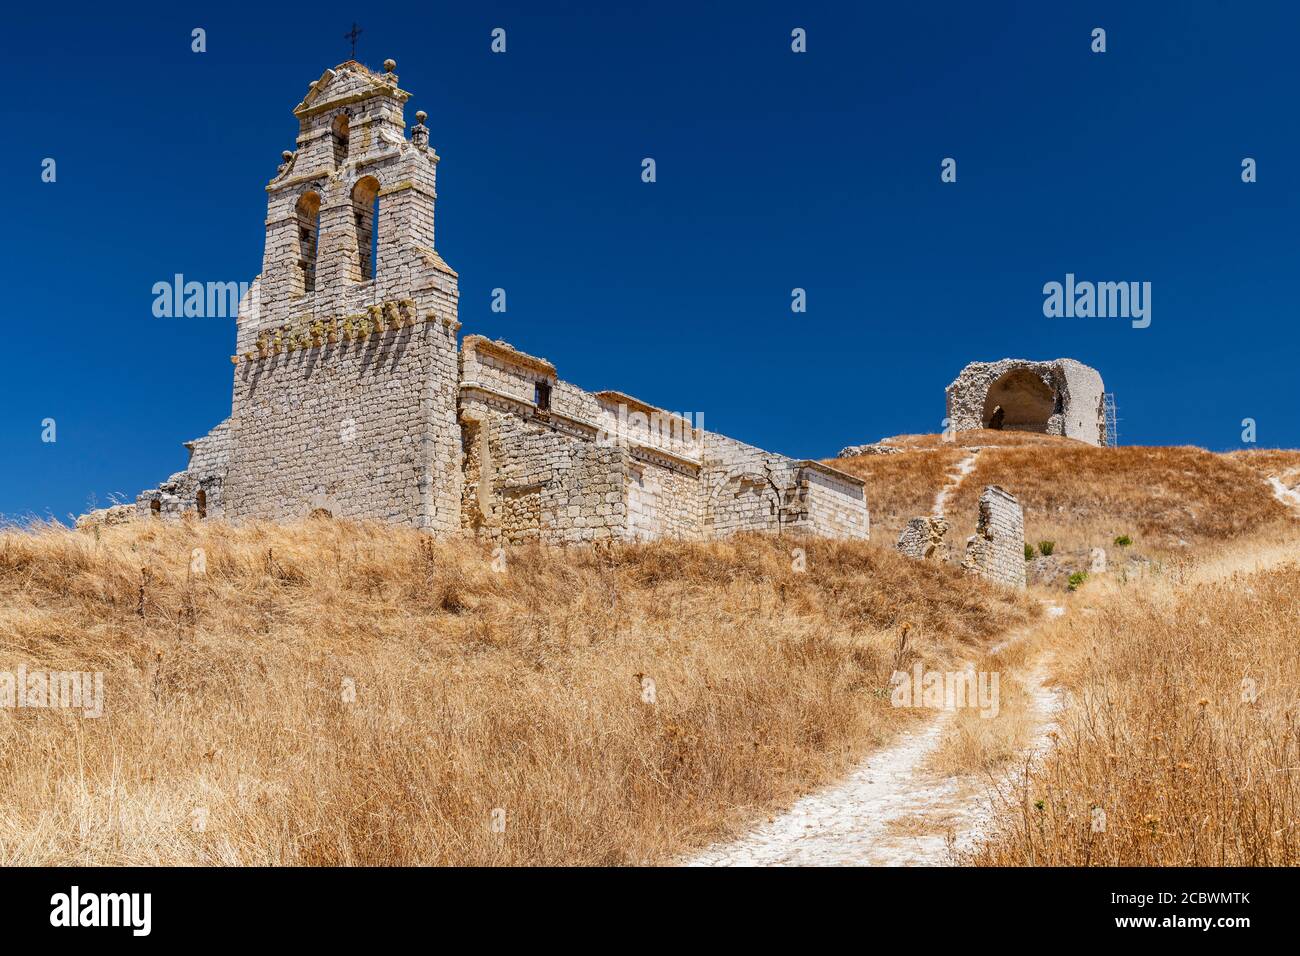 Old ruined church, Mota del Marques, Castile and Leon, Spain Stock Photo